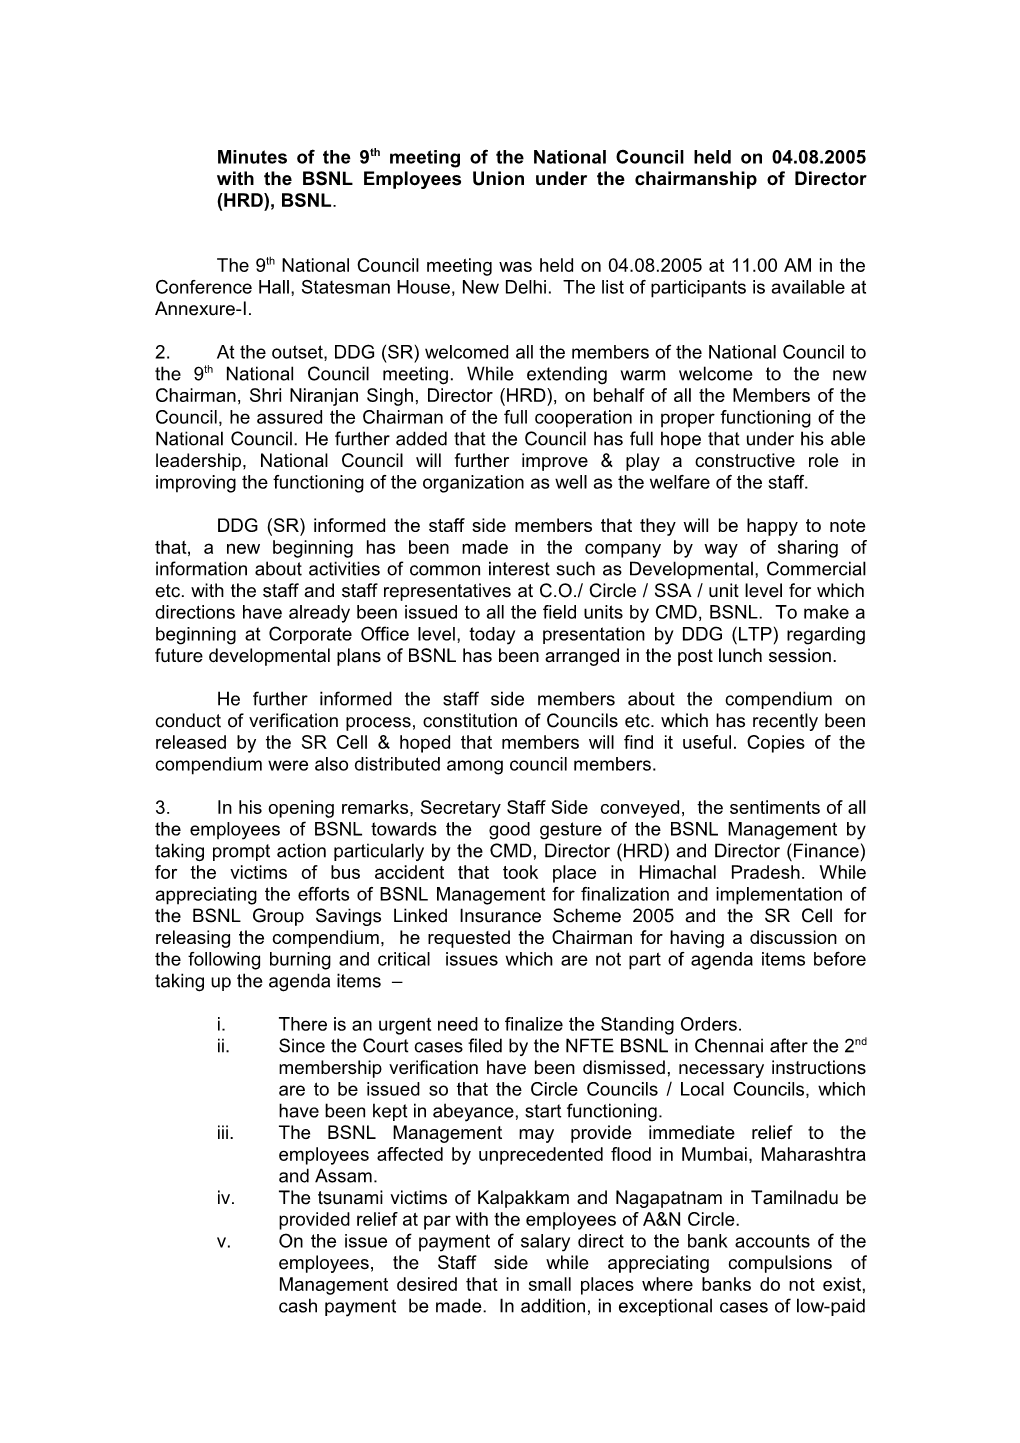 Minutes of the 9Th Meeting of the National Council Held on 04.08.2005 with the BSNL Employees